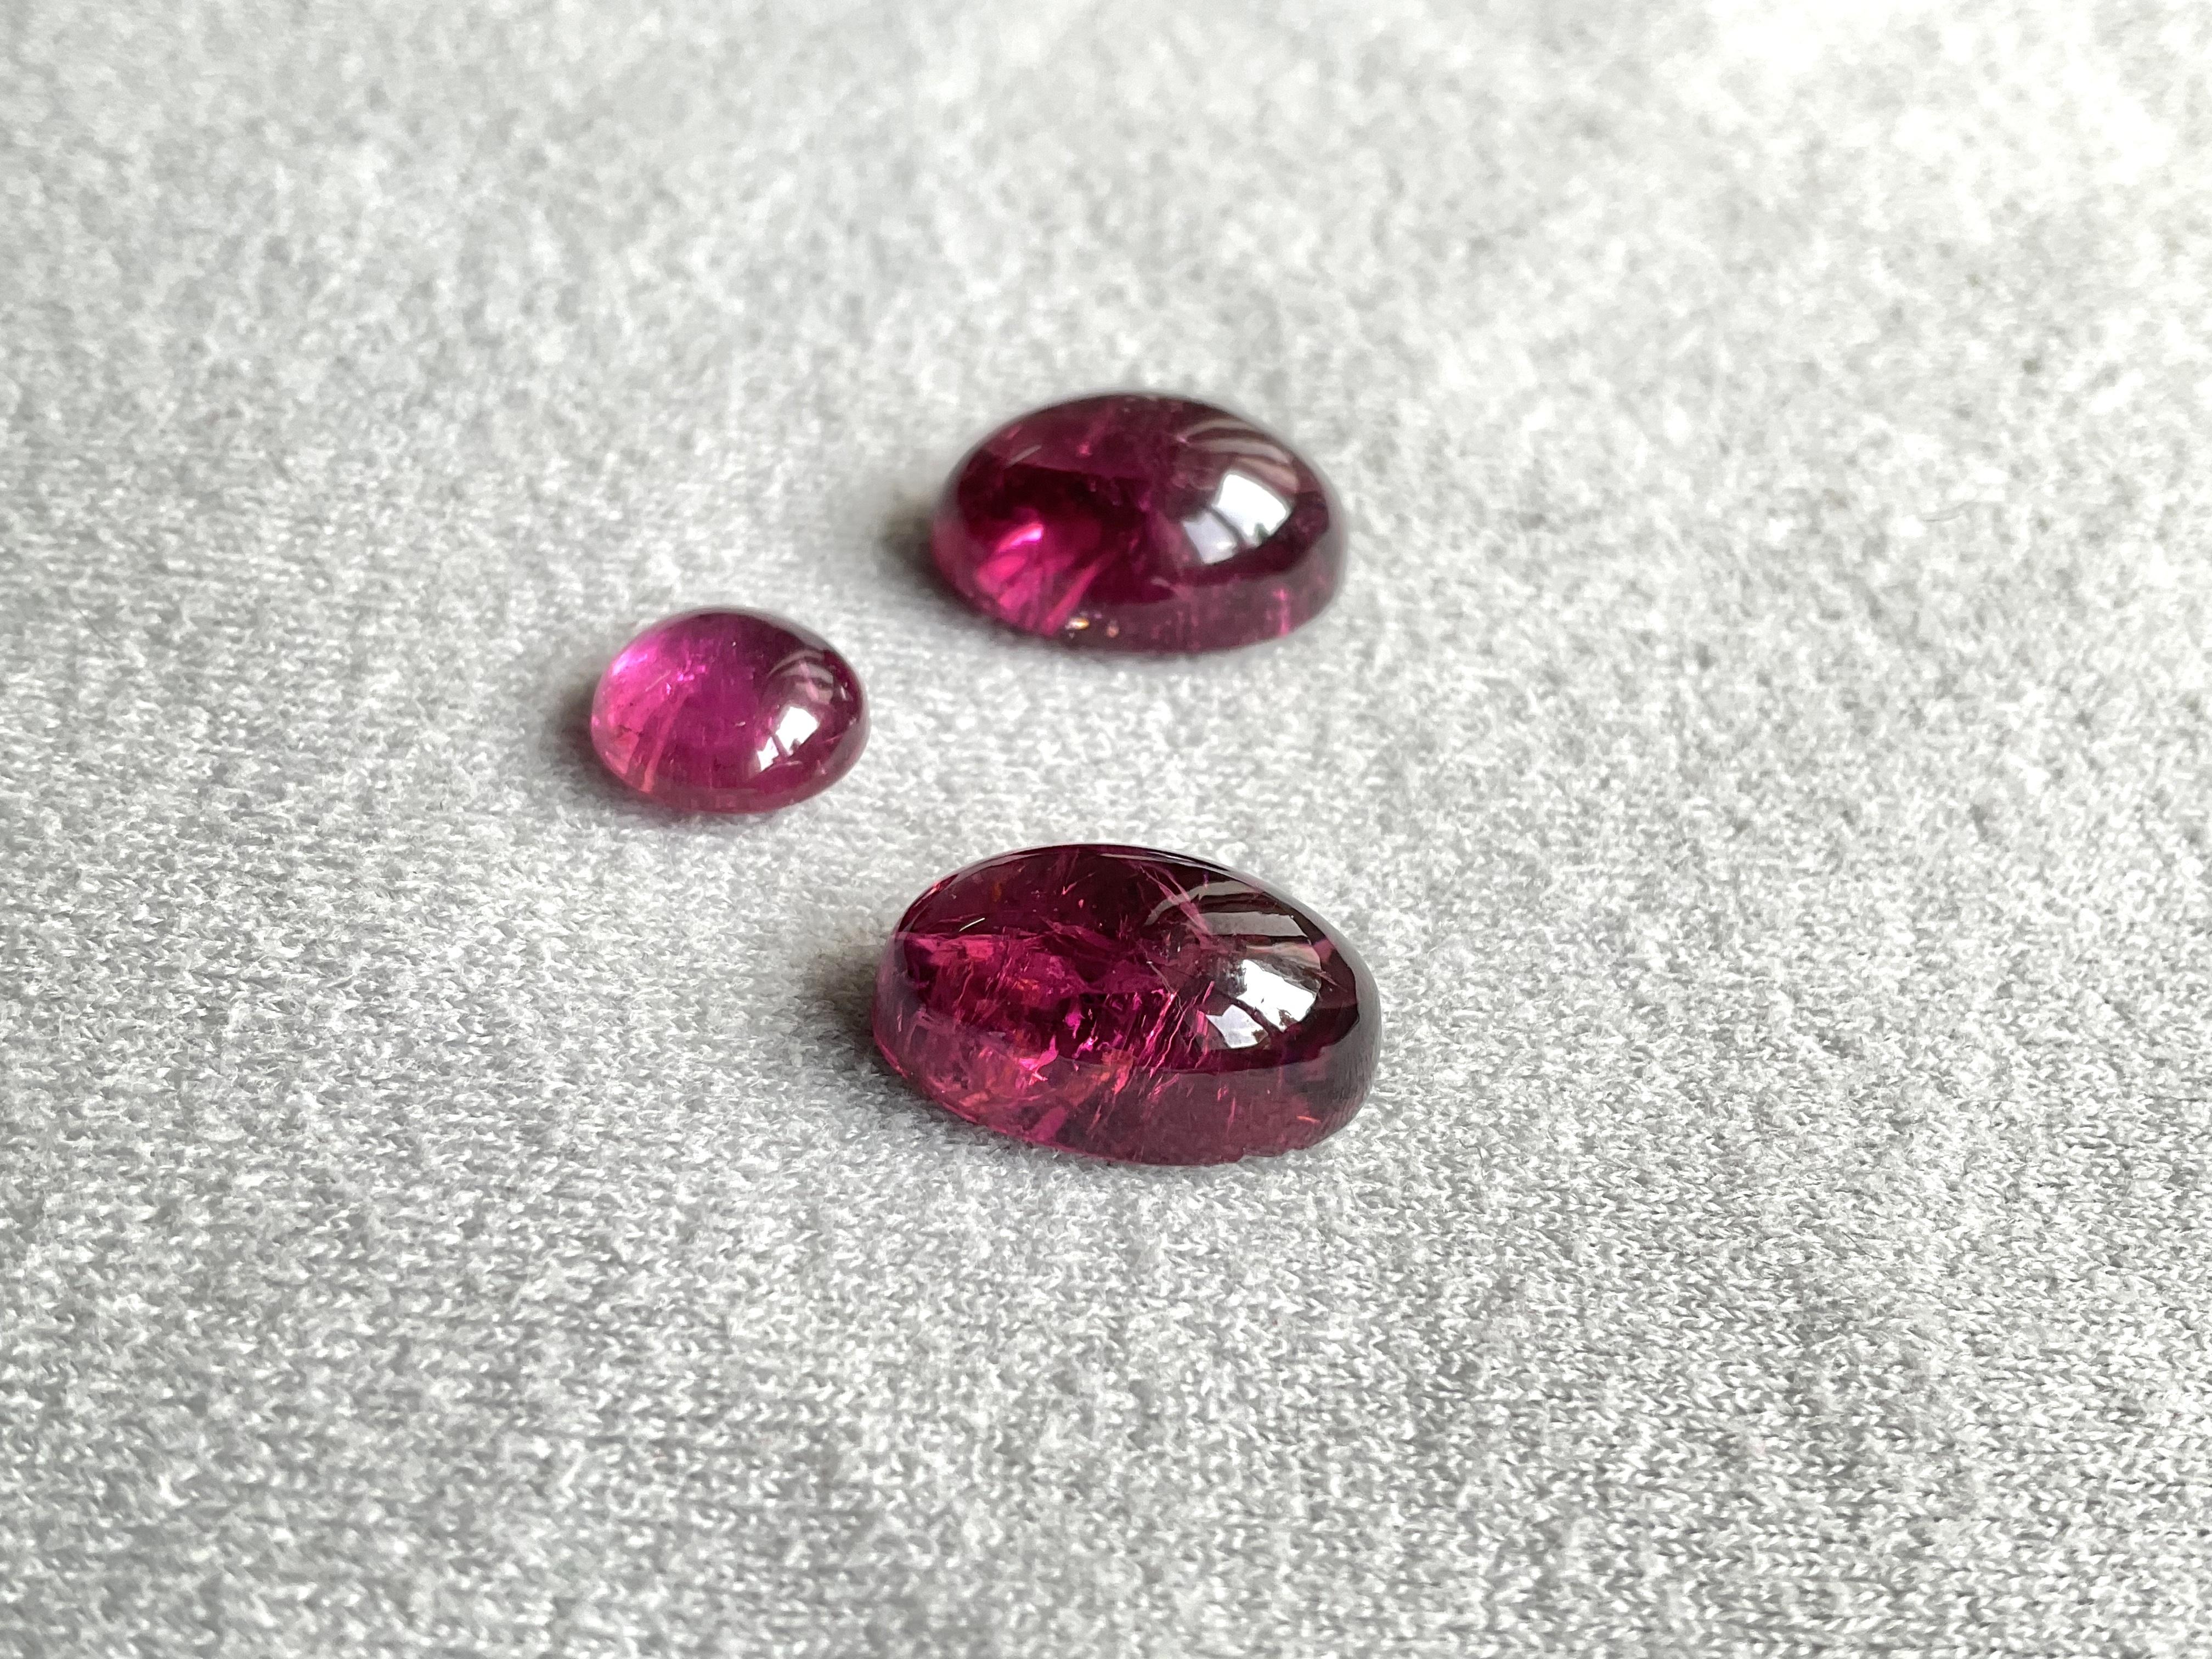 25.21 Carats Top Quality Rubellite Tourmaline Cabochon 3 Pieces Natural Gemstone For Sale 1